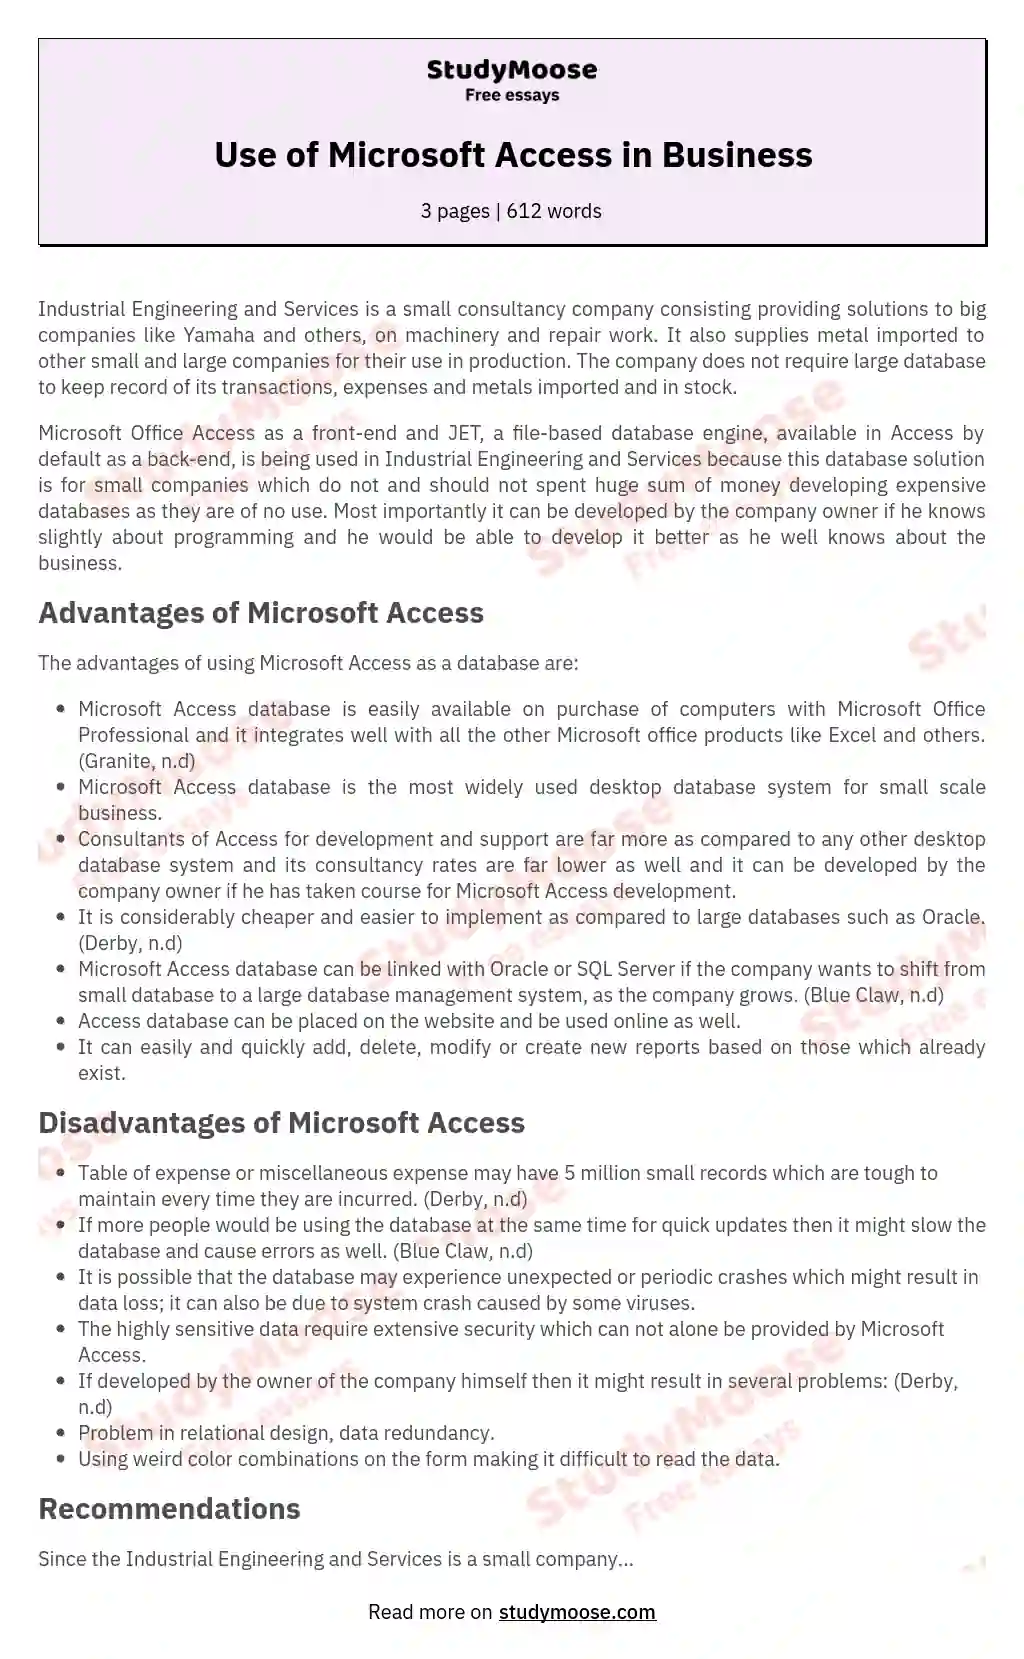 Use of Microsoft Access in Business essay